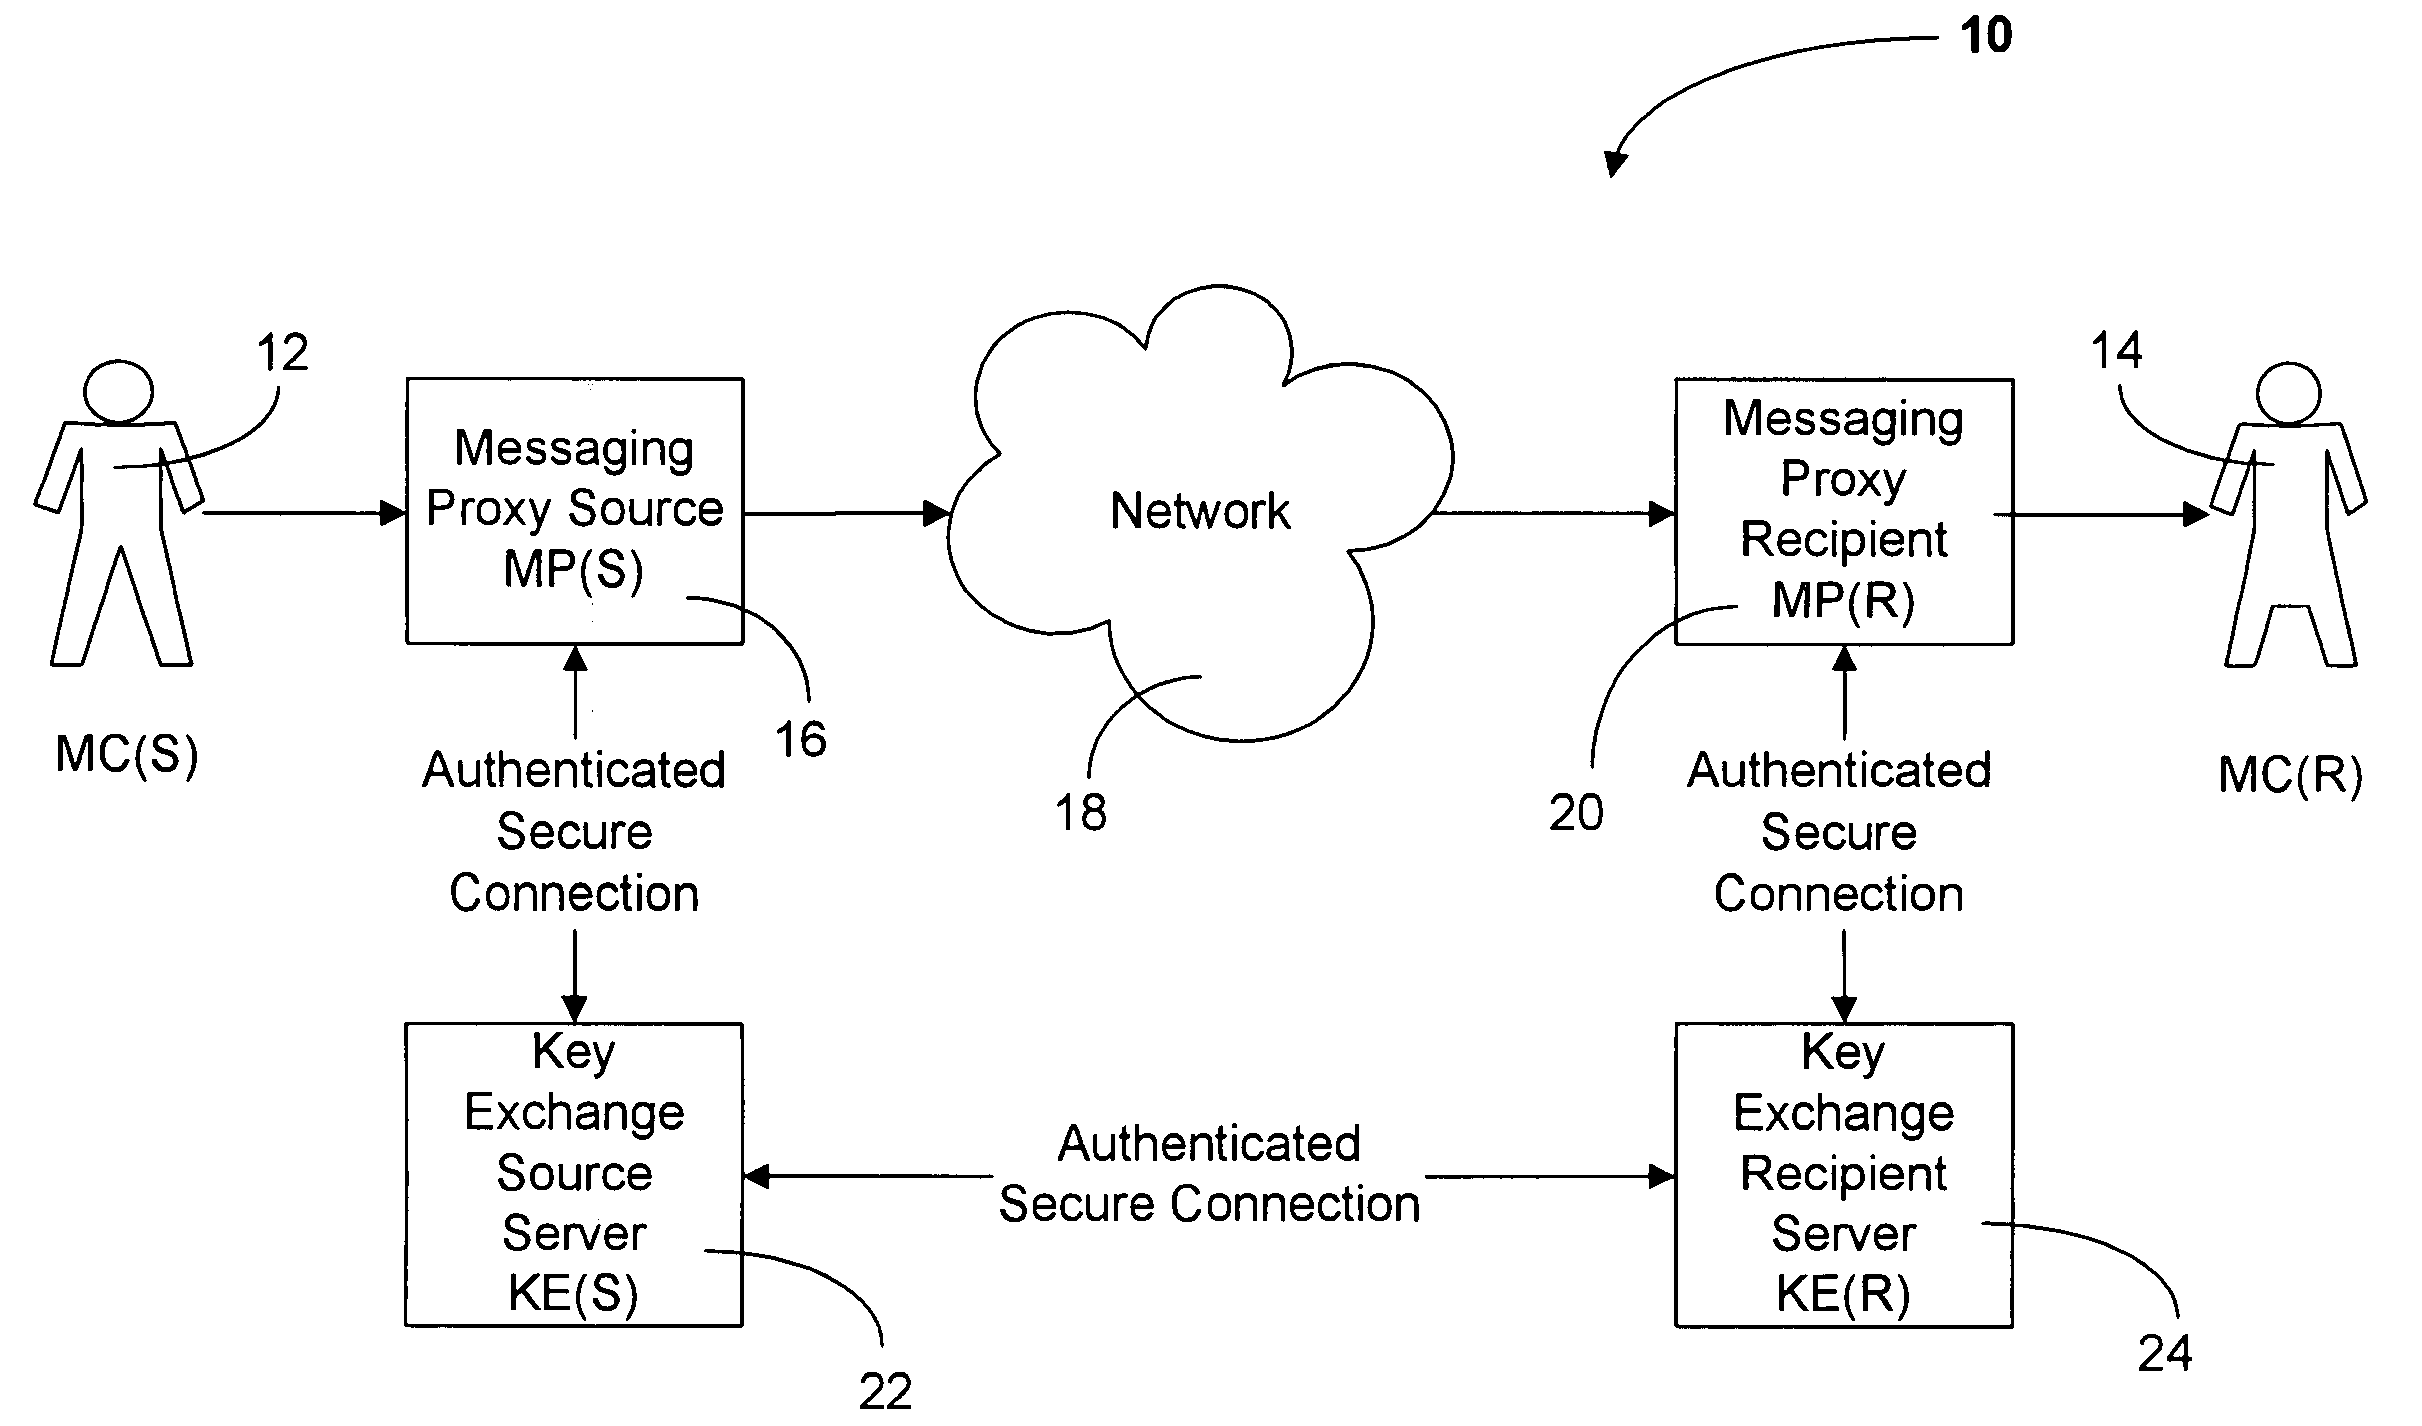 Method and system for sending secure messages over an unsecured network